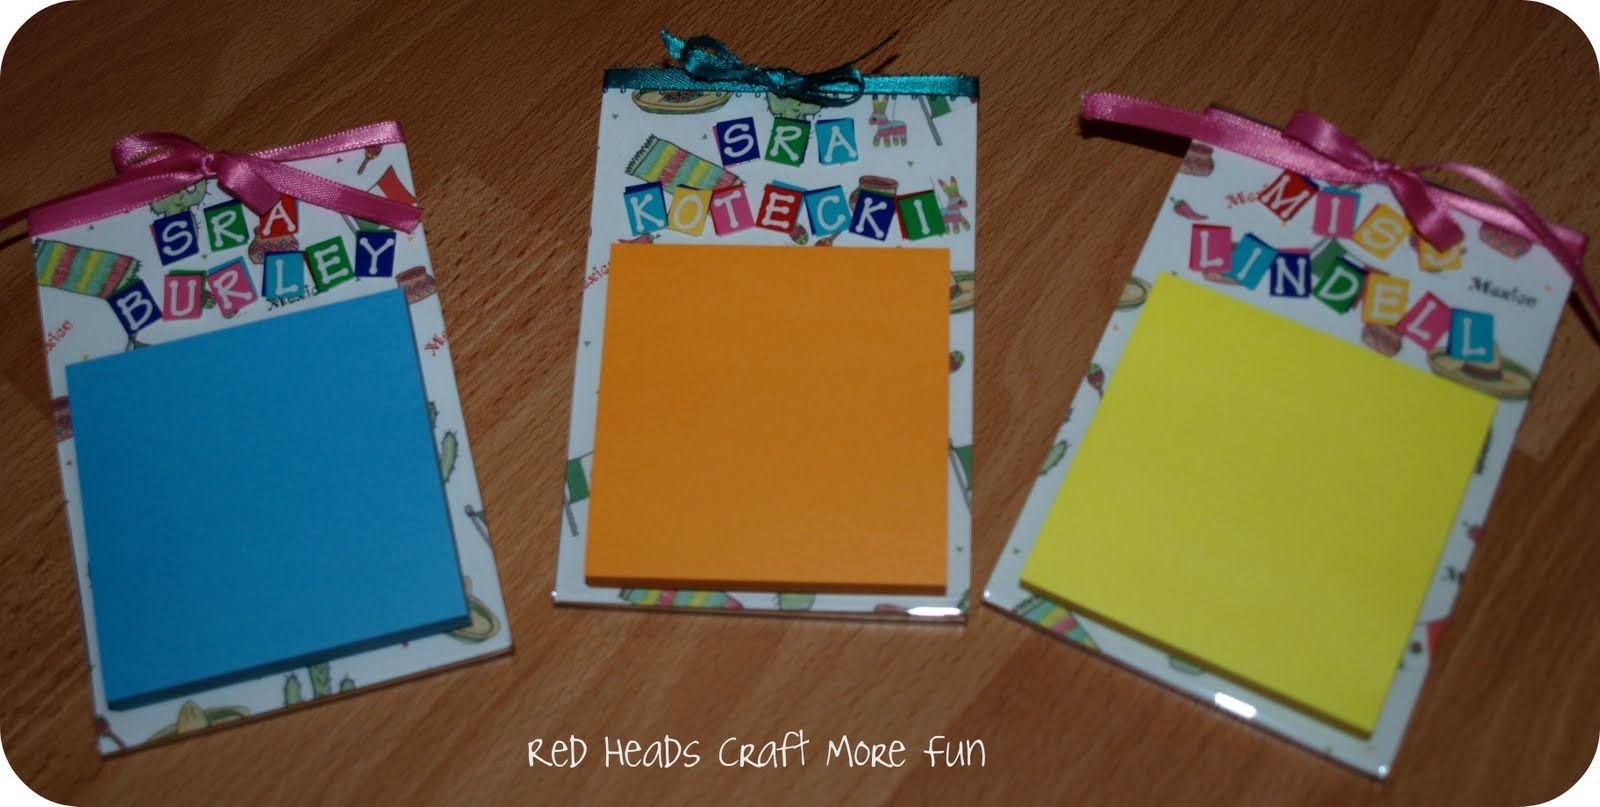 Post It Note Holder ~ Looking for an inexpensive, easy-to-make teacher or co-wor